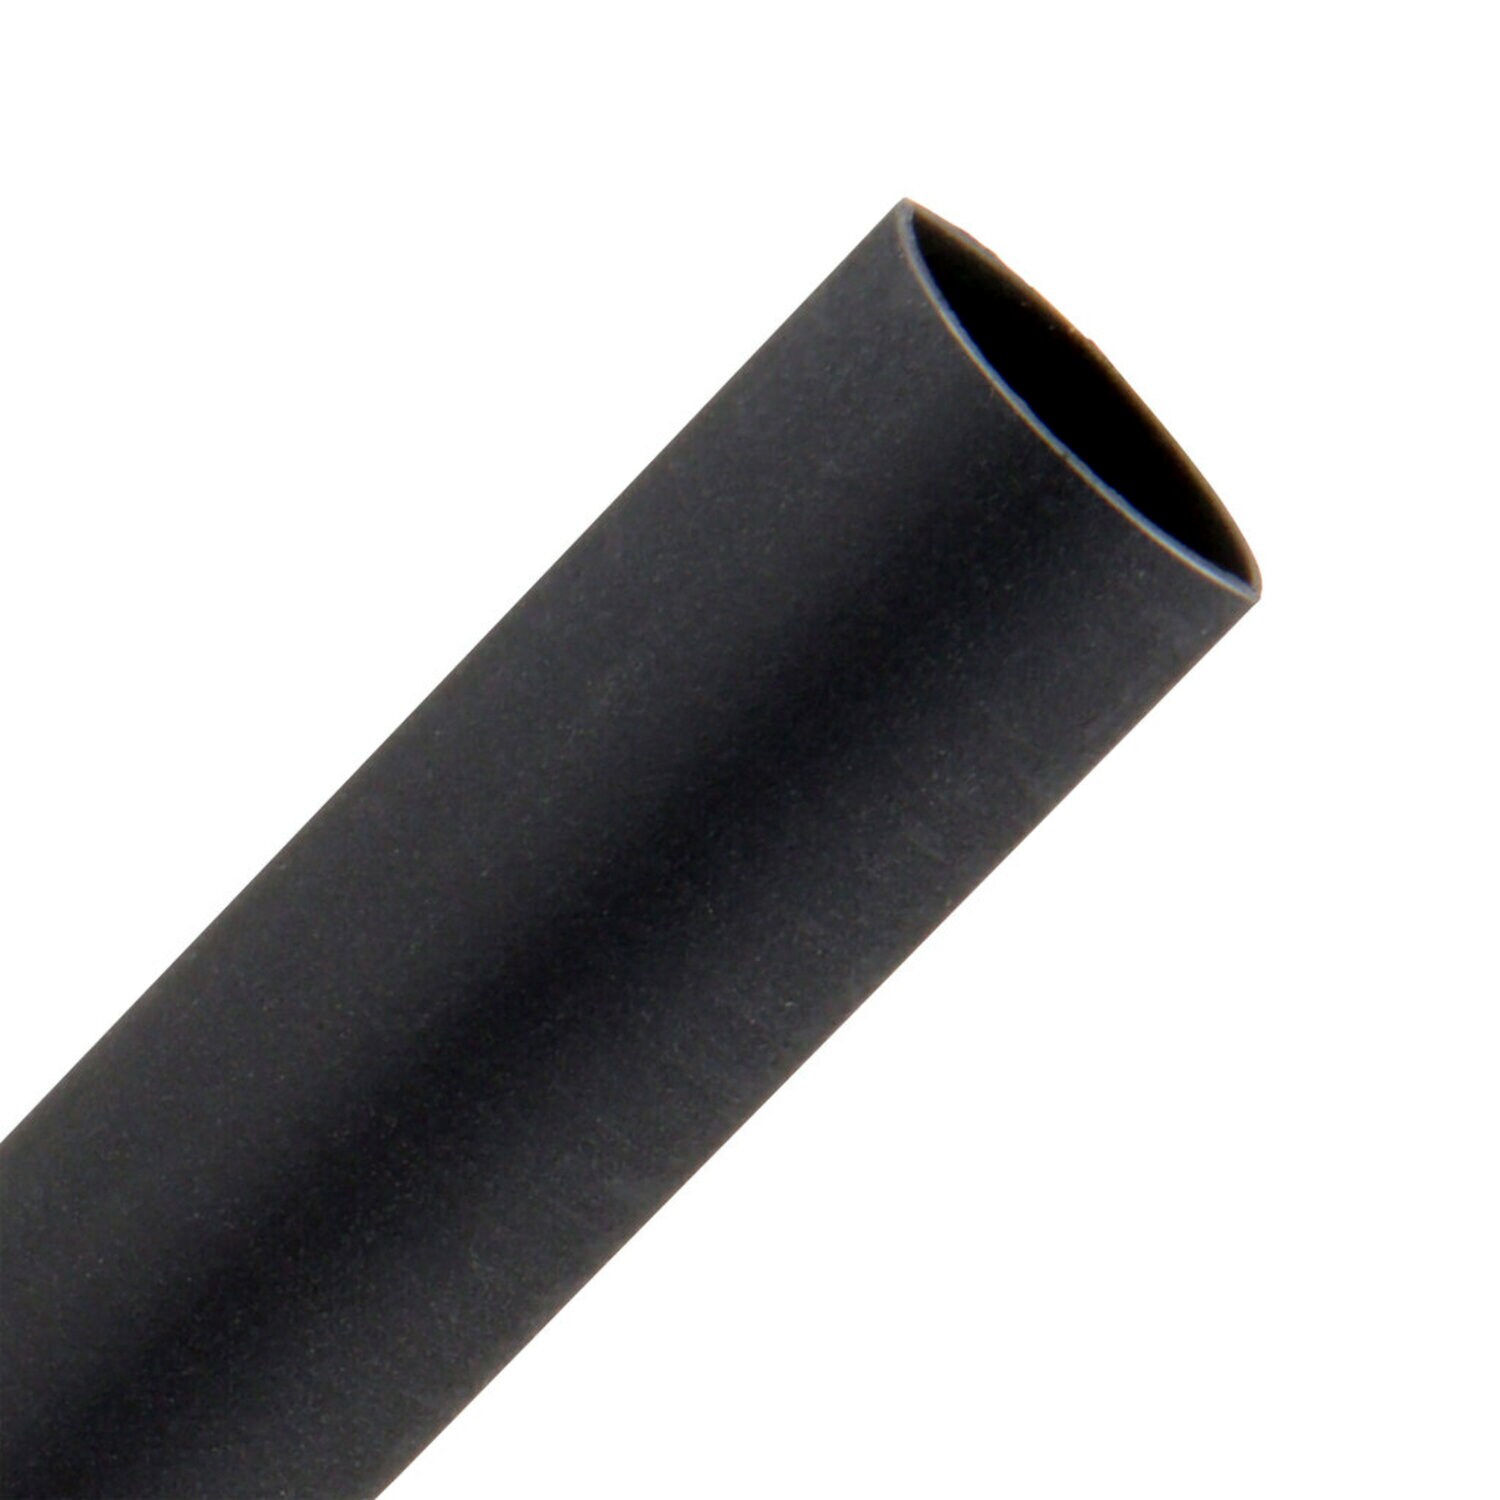 7100007365 - 3M Heat Shrink Thin-Wall Tubing FP-301-3/8-48"-Black-12 Pcs, 48 in
Length sticks, 12 pieces/case